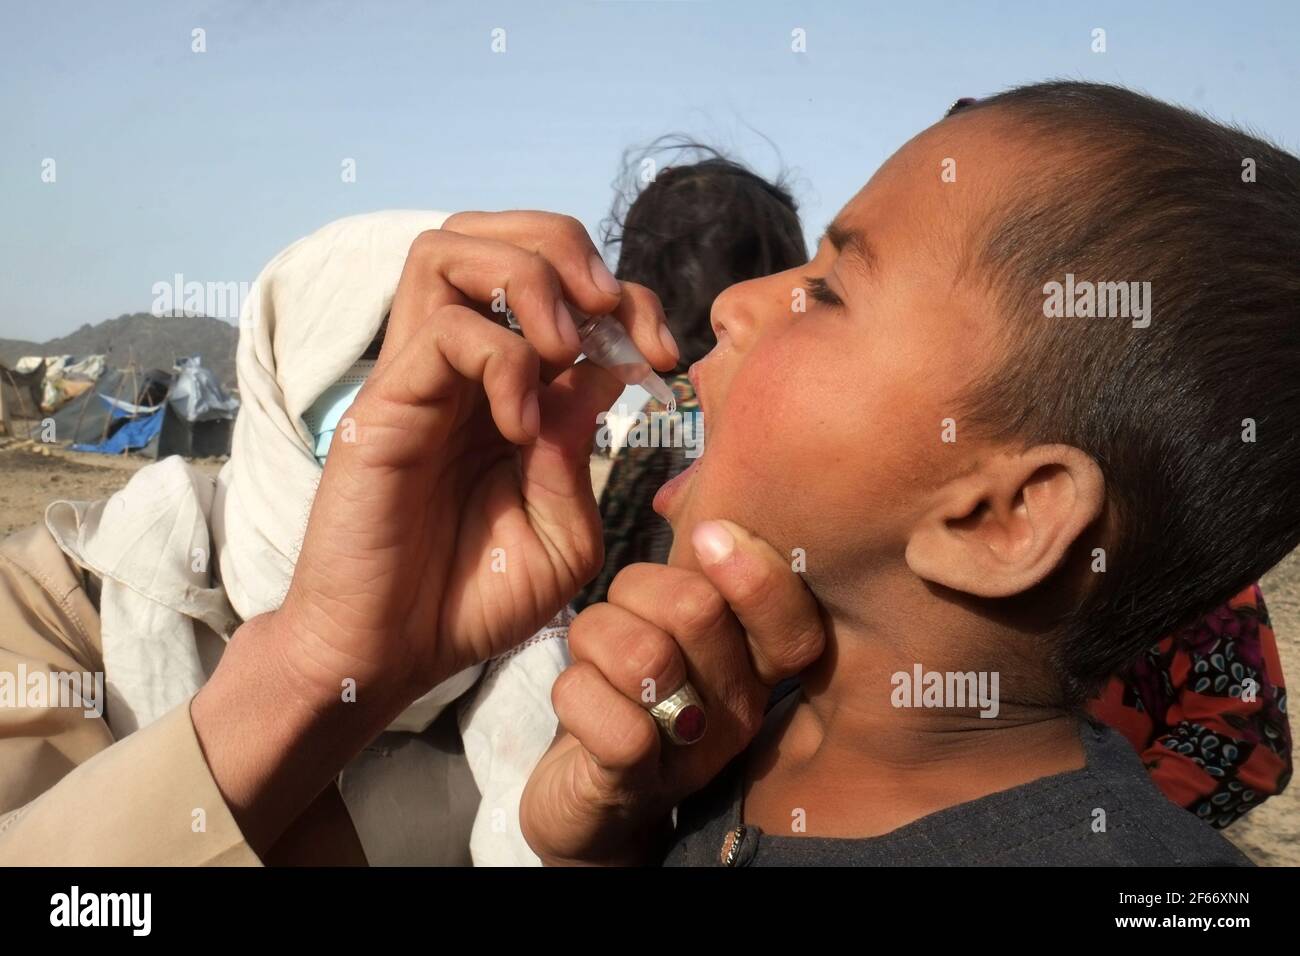 Kandahar, Afghanistan. 30th Mar, 2021. A health worker gives a polio vaccine to a child during an anti-polio vaccination campaign in Panjwai district of Kandahar province, southern Afghanistan, March 30, 2021. On Monday, the Afghan Public Health Ministry launched a nationwide campaign to give polio vaccination doses to 9.6 million children under the age of five. Credit: Sanaullah Seiam/Xinhua/Alamy Live News Stock Photo